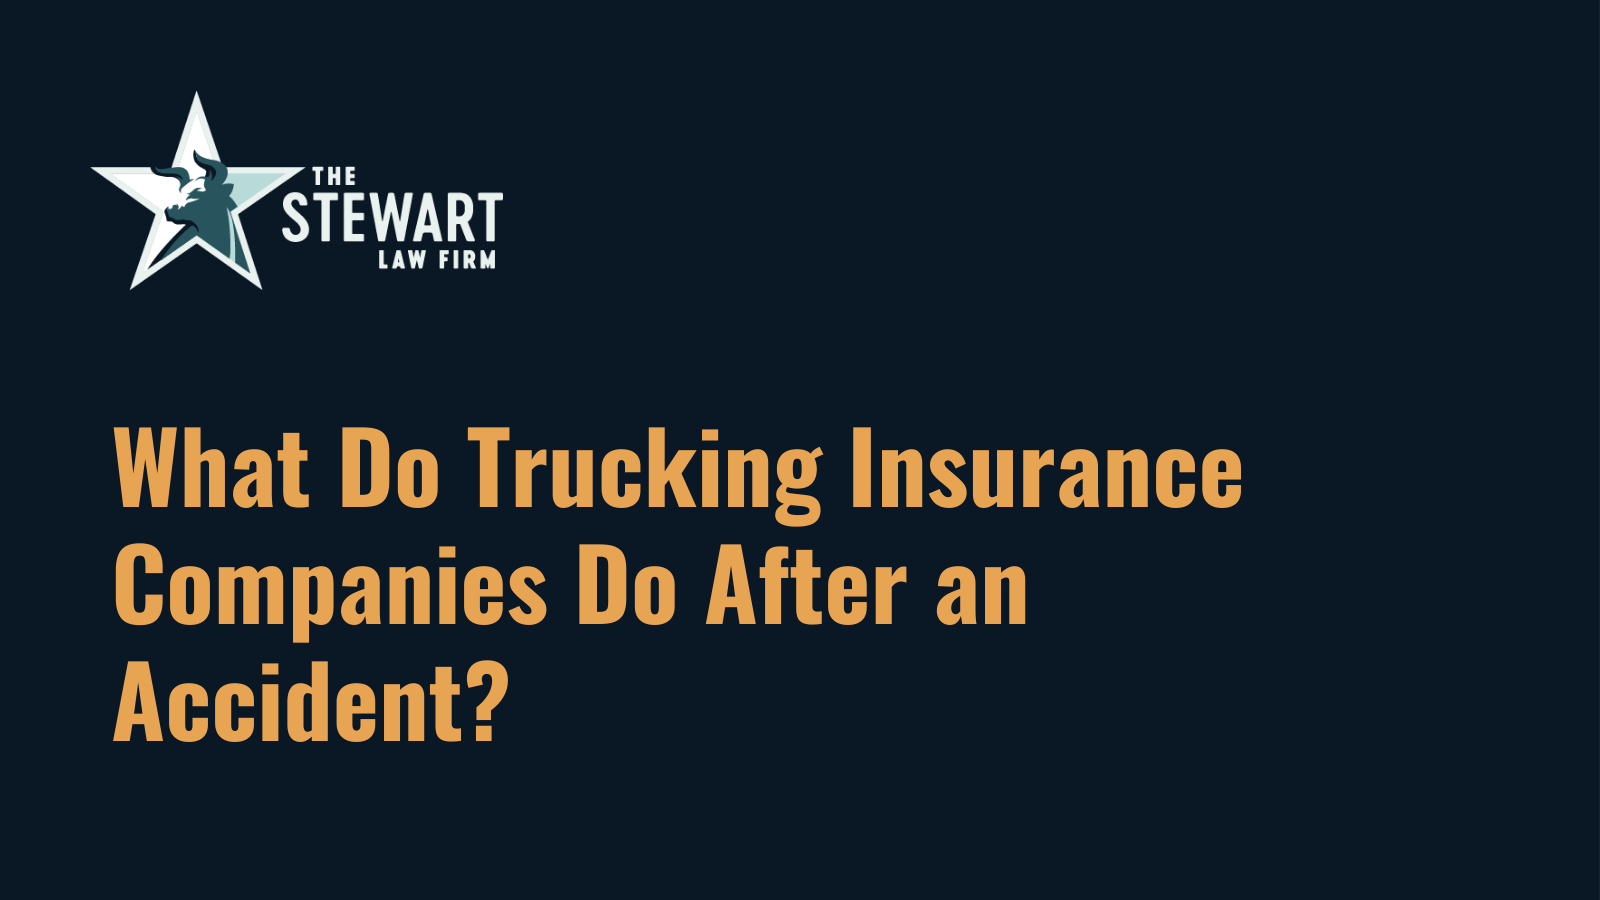 What Do Trucking Insurance Companies Do After an Accident - the stewart law firm - austin texas personal injury lawyer